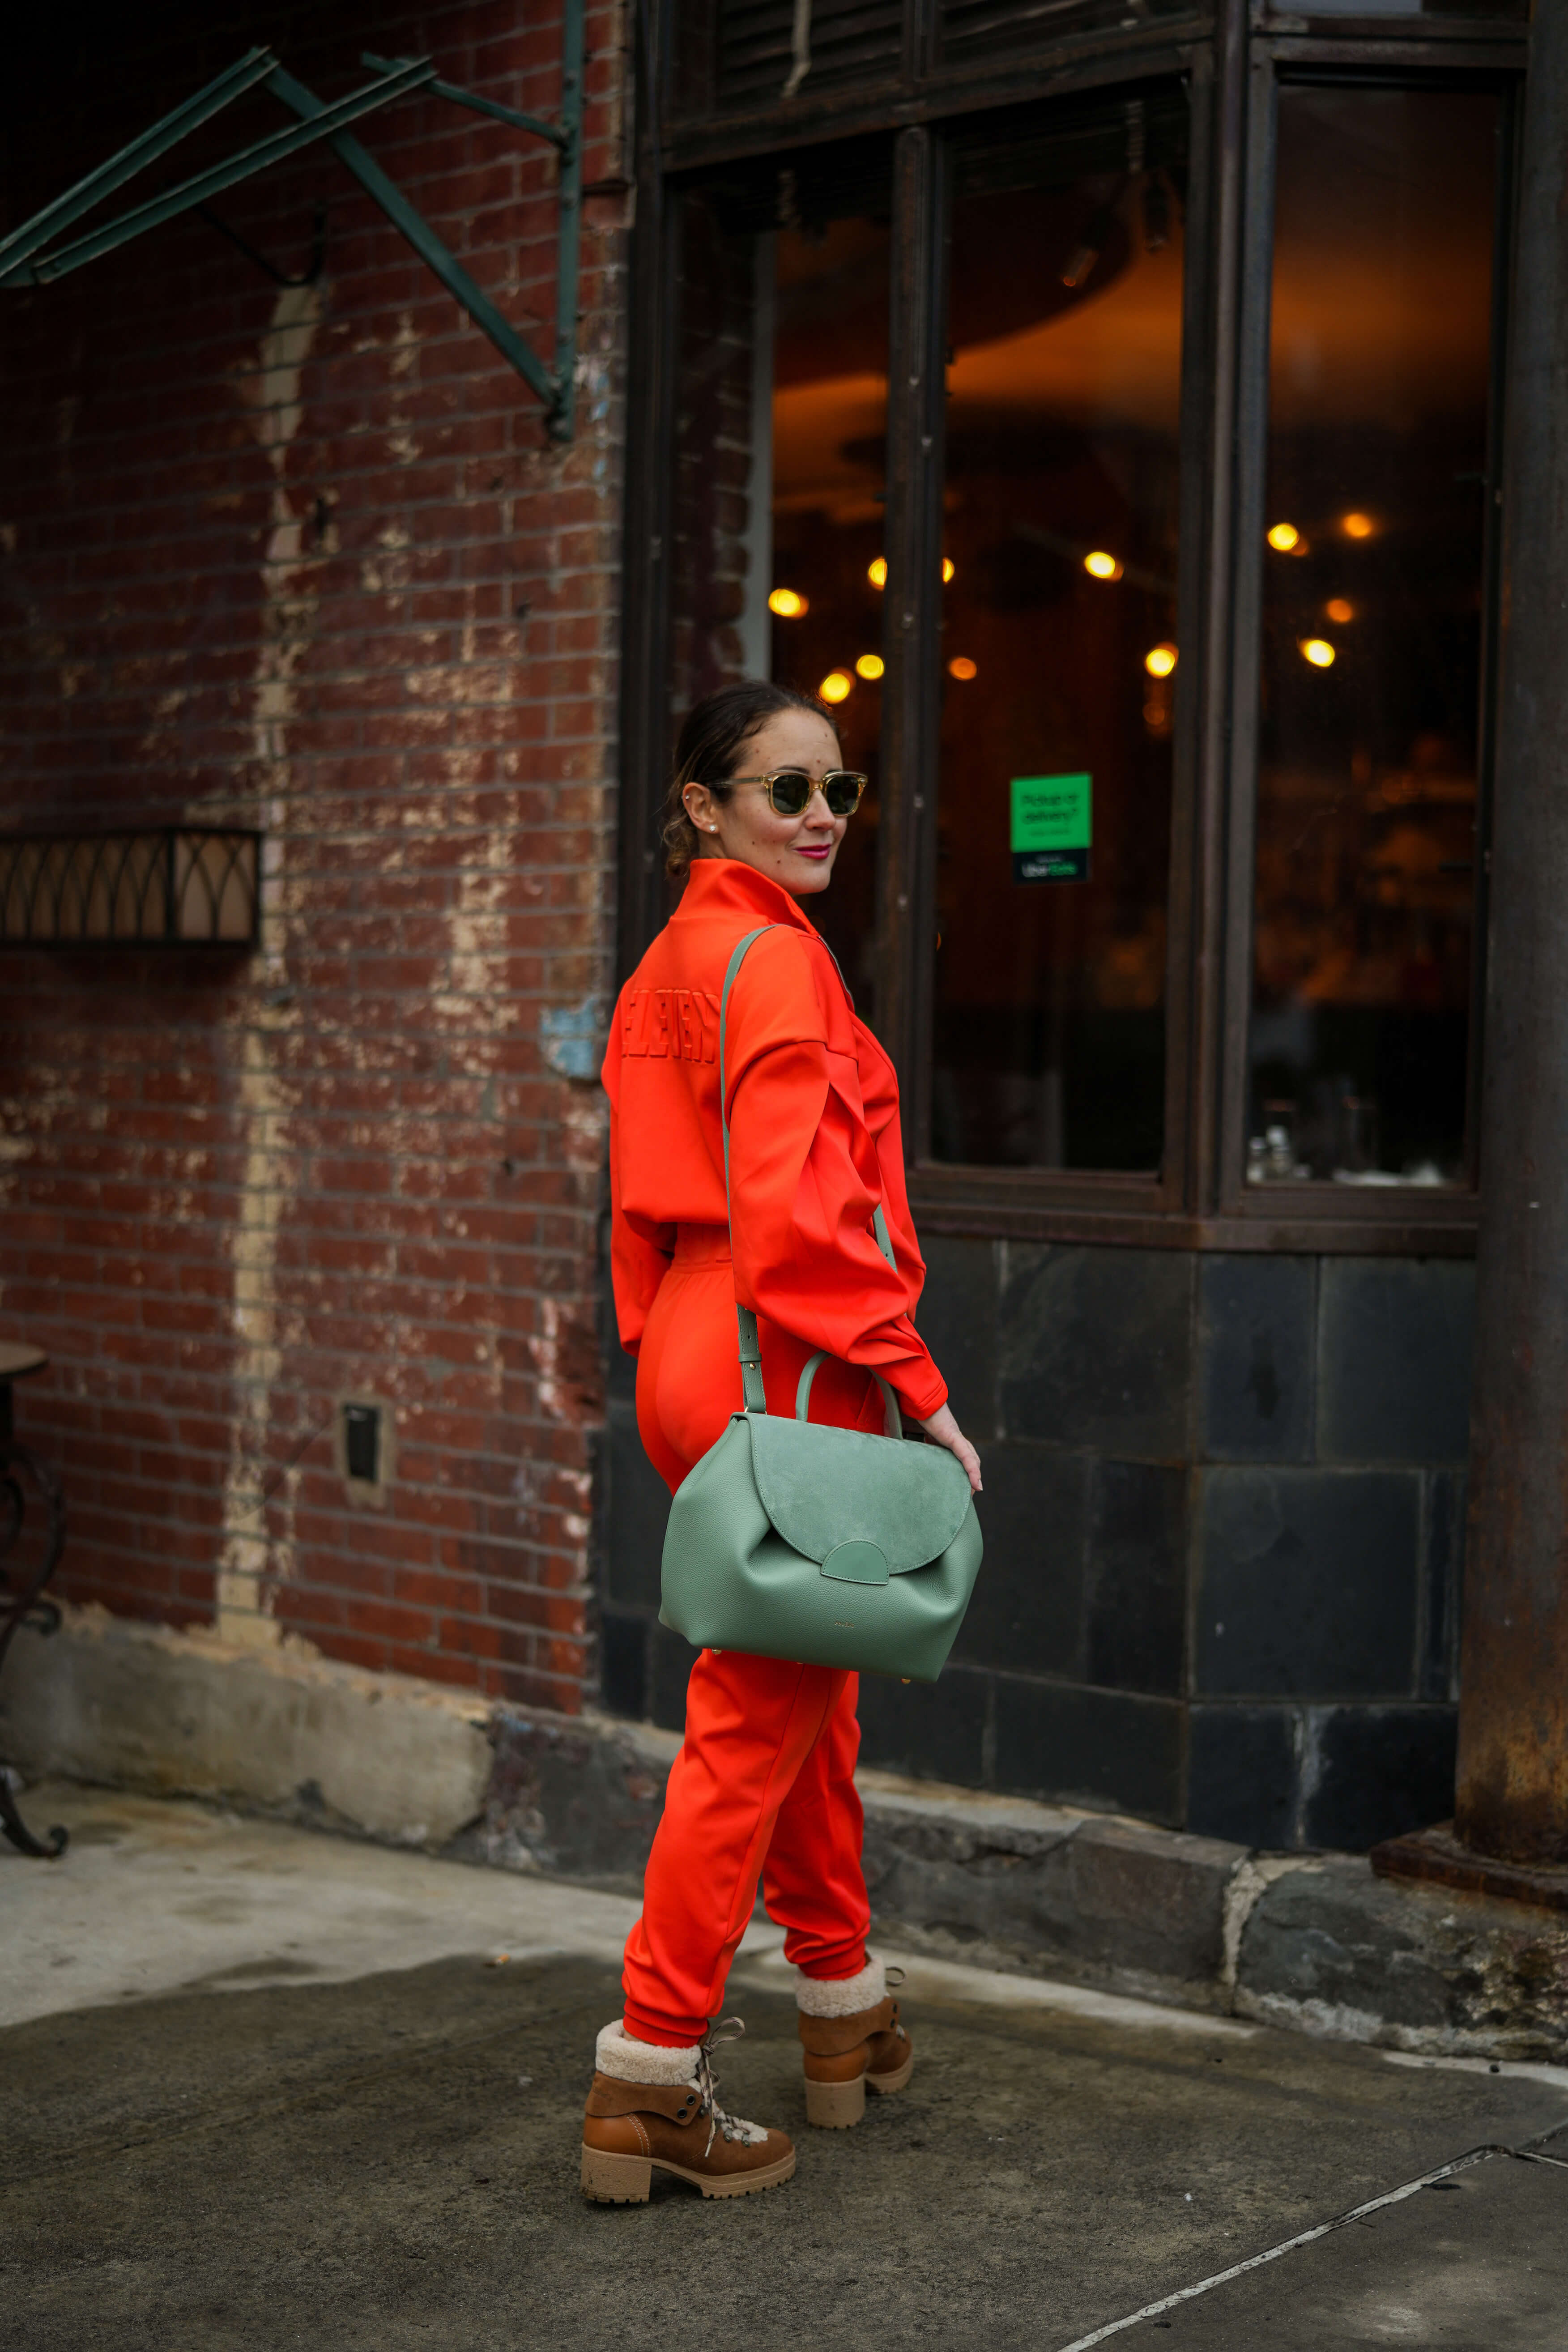 Eleven by Venus Williams Track Suit Polene Bag See by Chloe Boots Garrett Leight Sunnies Outfit by Modnitsa Styling